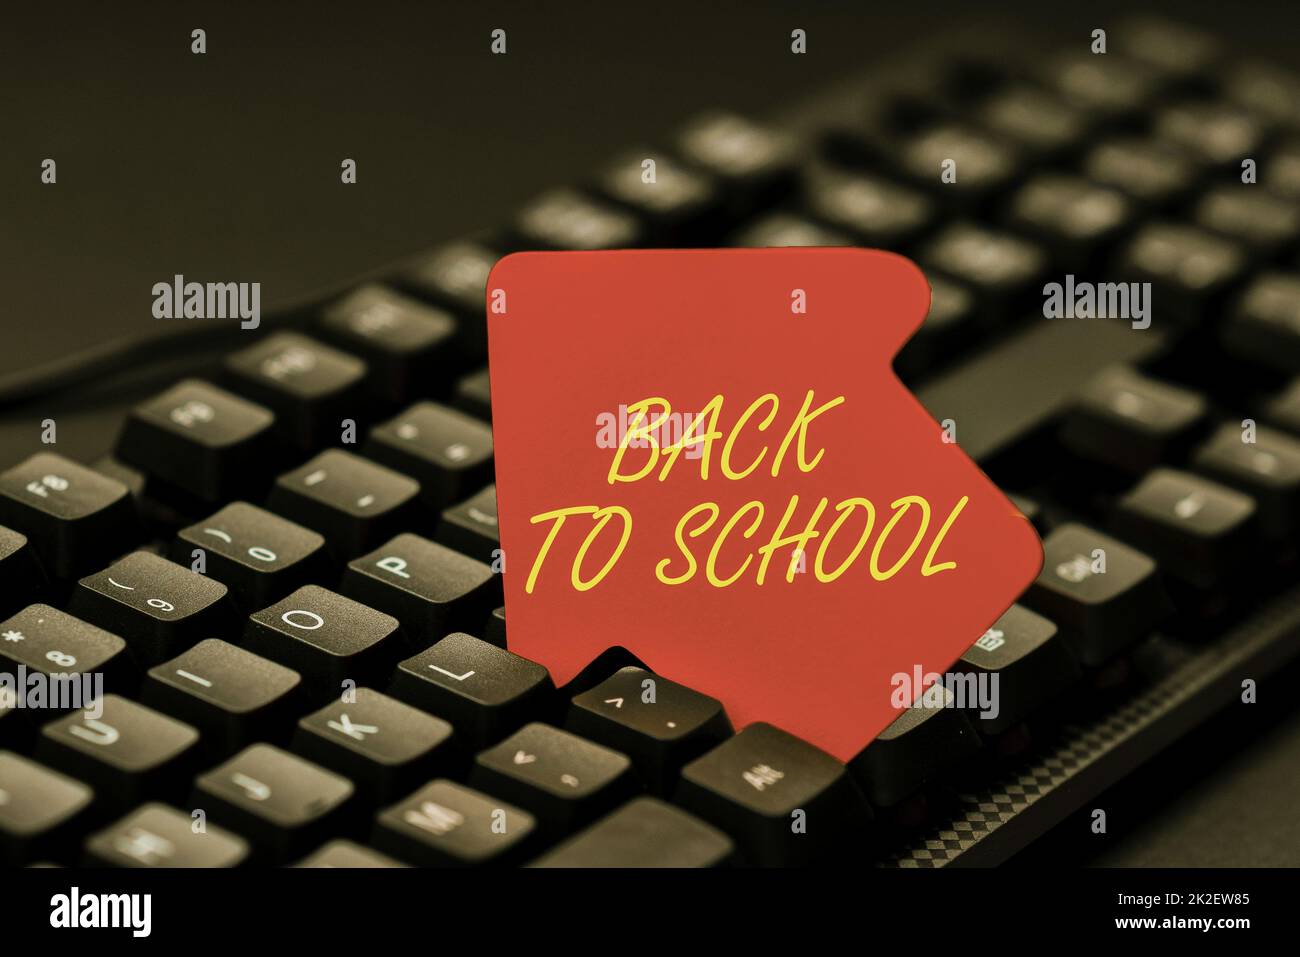 Writing displaying text Back To School. Business concept is the period relating to the start of a new school year Entering Image Keyword And Description, Typing Word Definition And Meaning Stock Photo